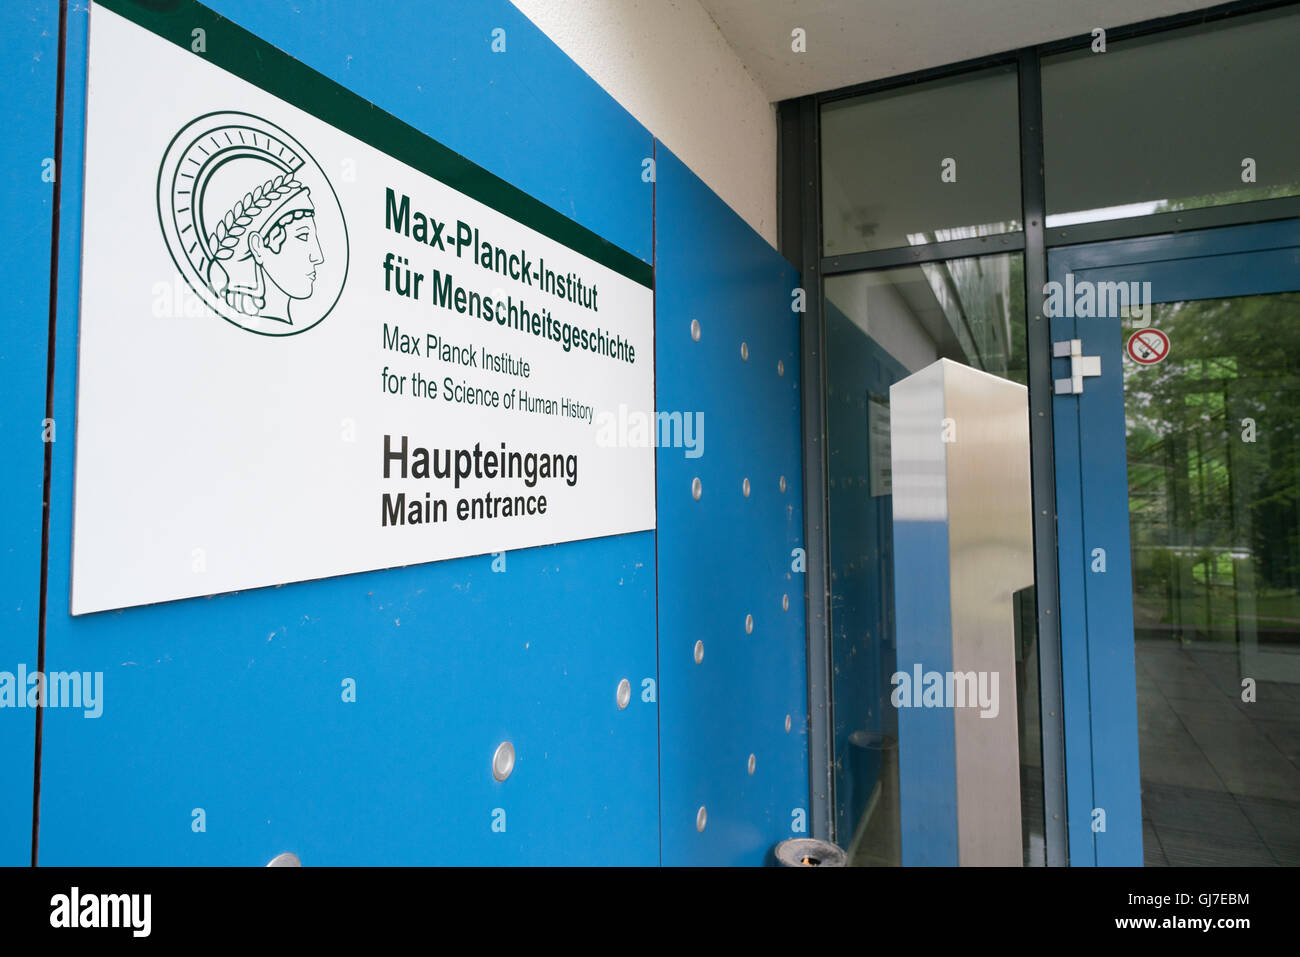 JENA, GERMANY - MAY, 29, 2016: Max Planck Institute for the Science of Human History.  The institute was founded in March 2014. Stock Photo